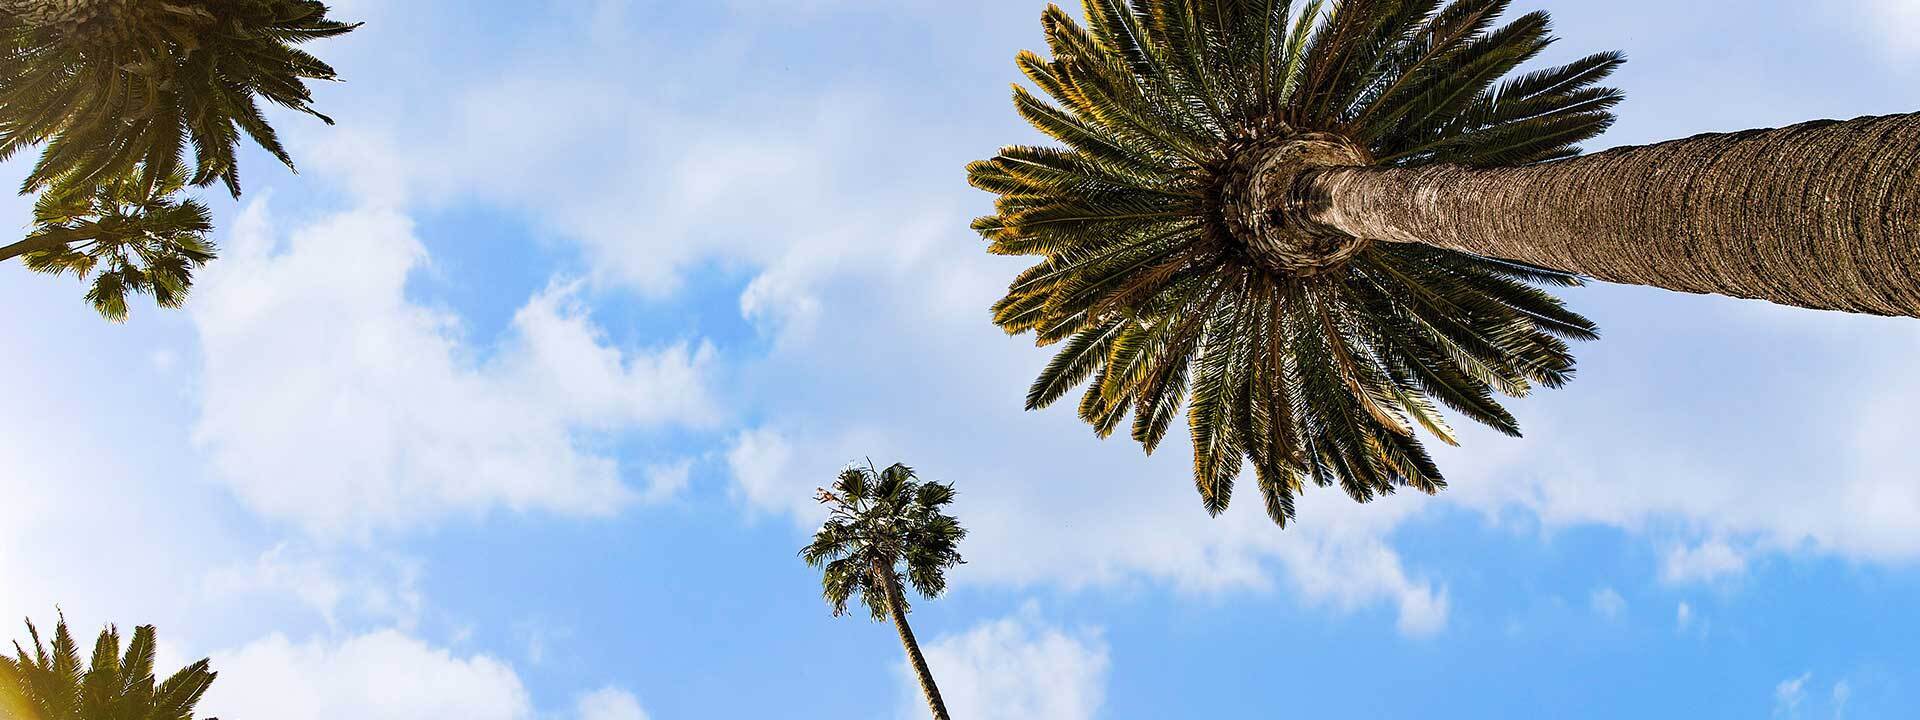 Looking up at blue sky beneath a few palm trees